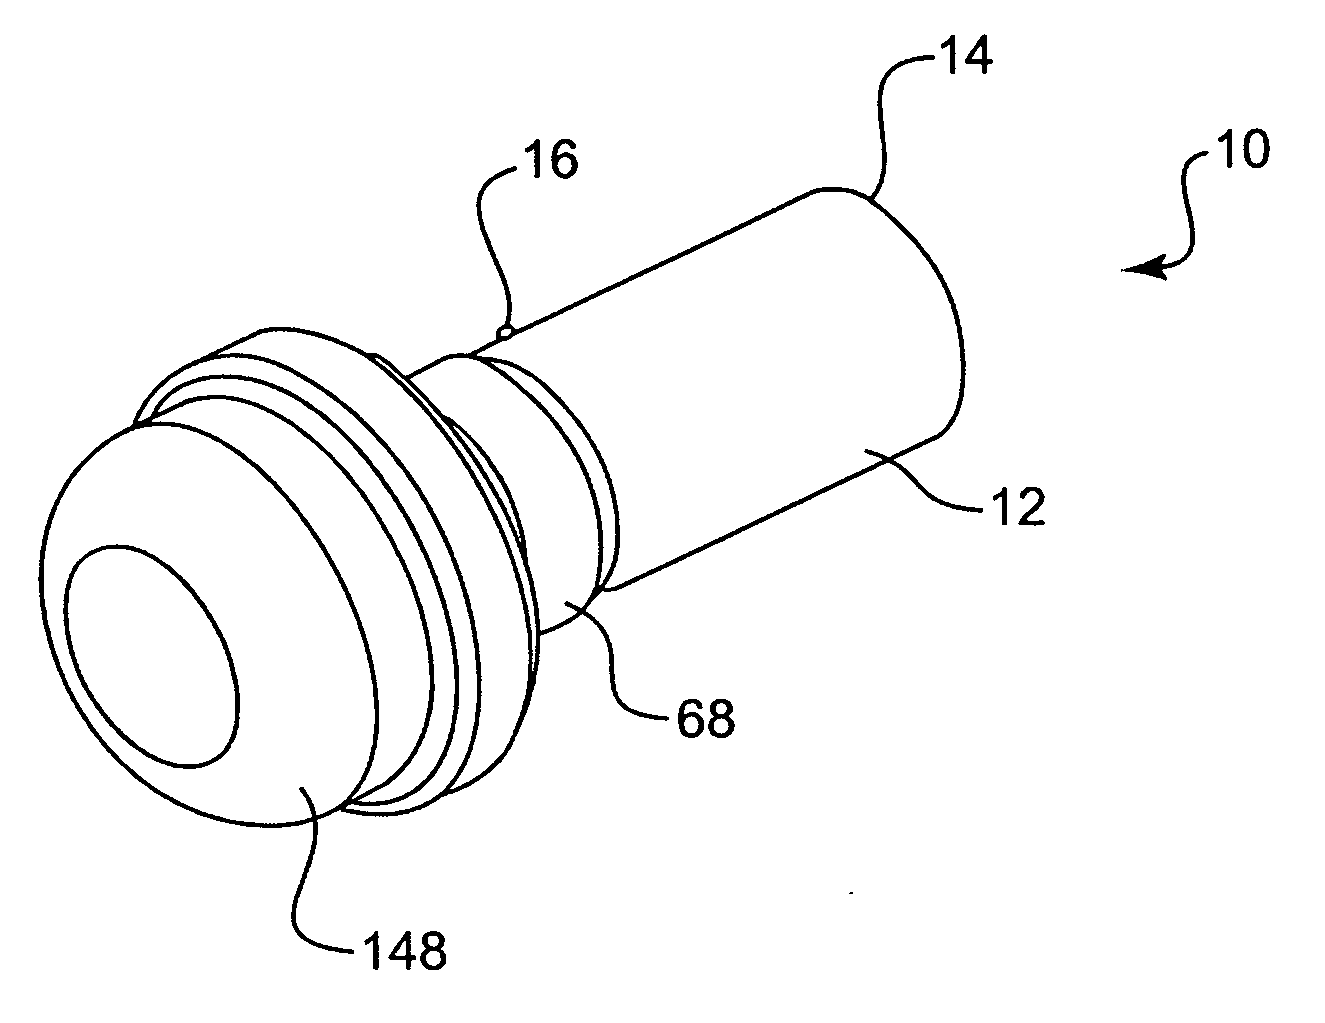 Removable, multi-purpose utility light for motor vehicles